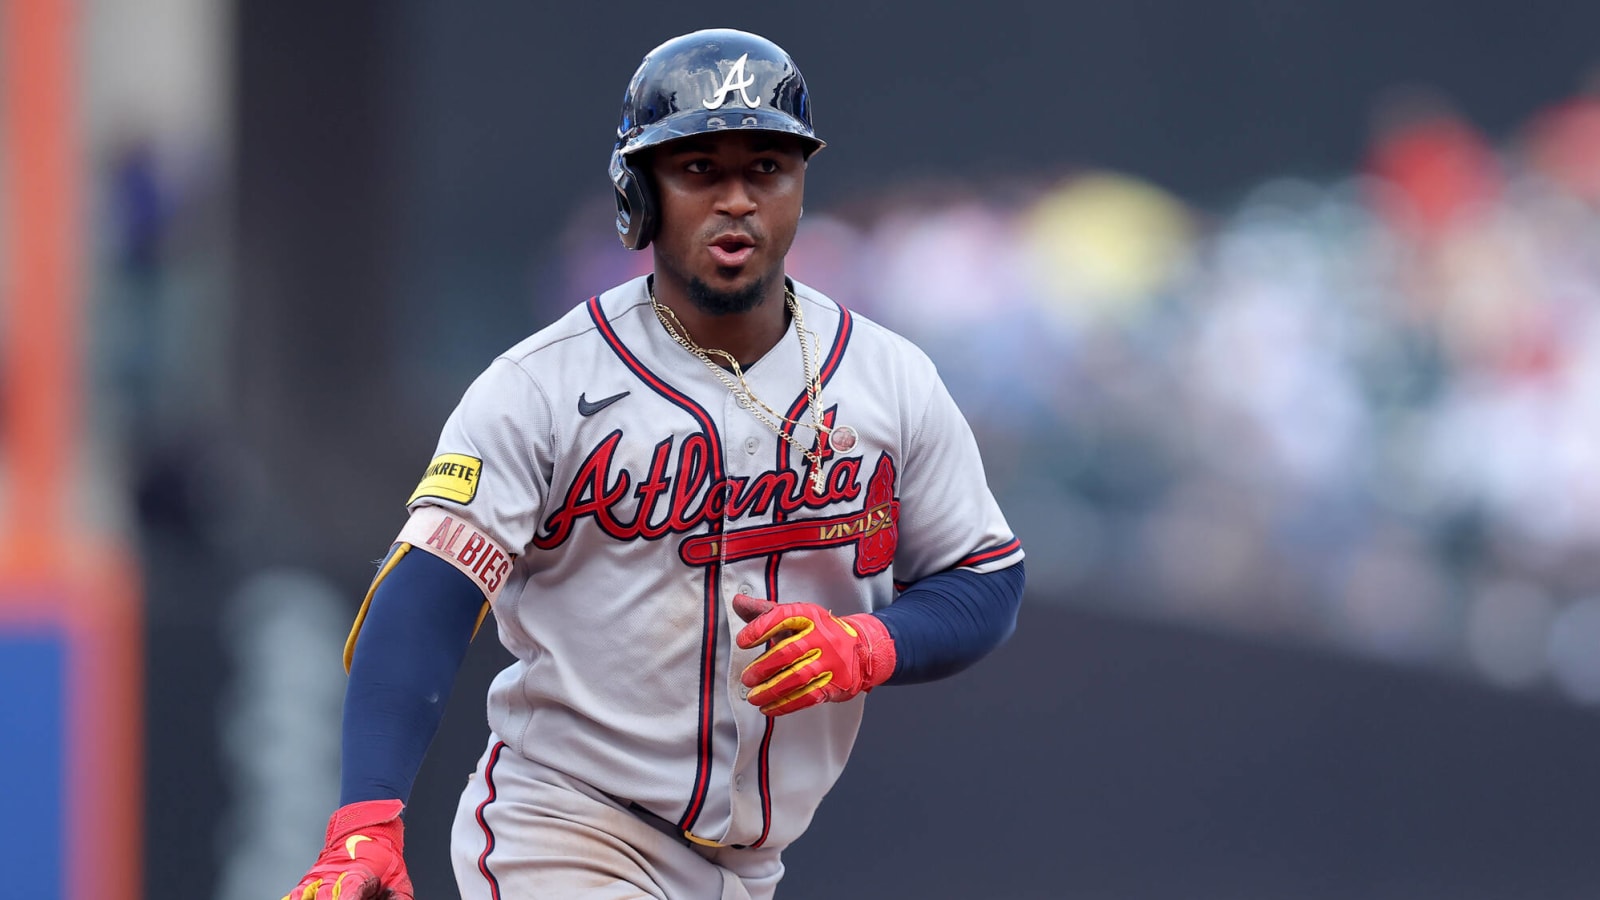 Ozzie albies HD wallpapers